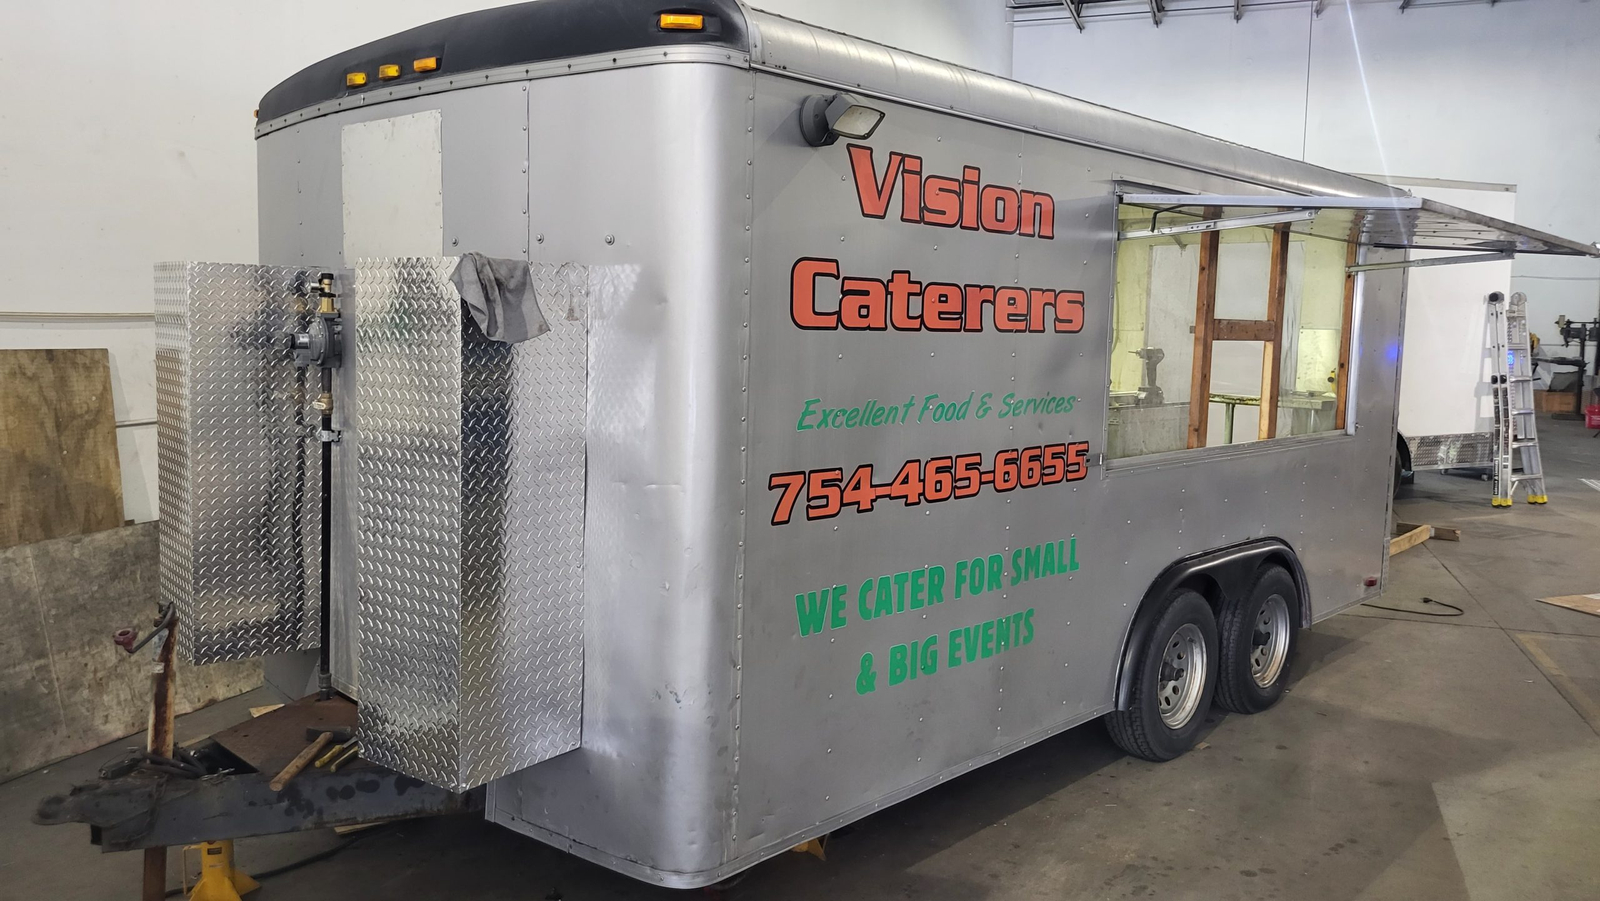 20230509 134620 scaled - Vision Caterers